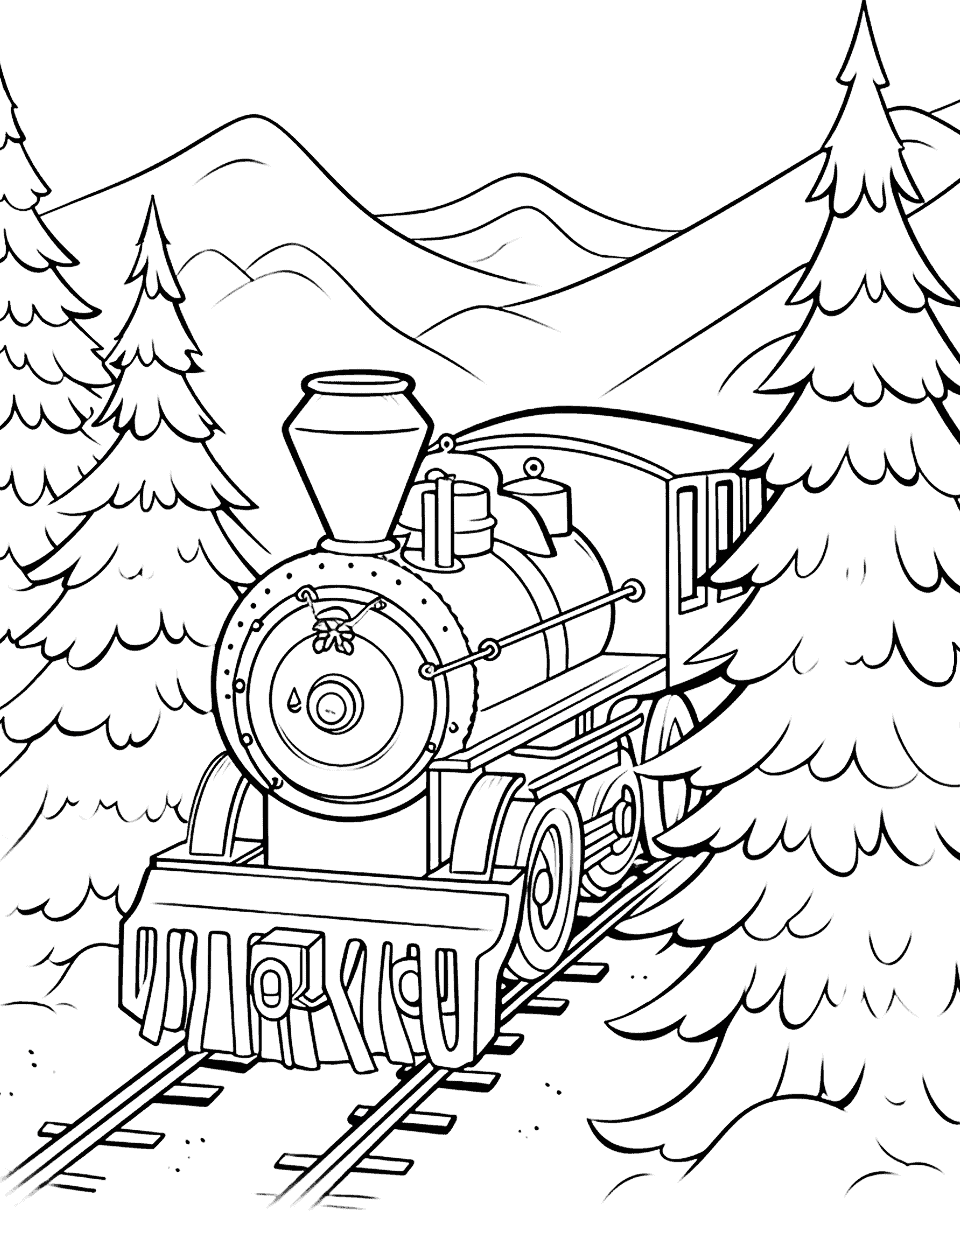 Polar Express Journey Christmas Coloring Page - The magical Polar Express journeying through the snowy mountains.